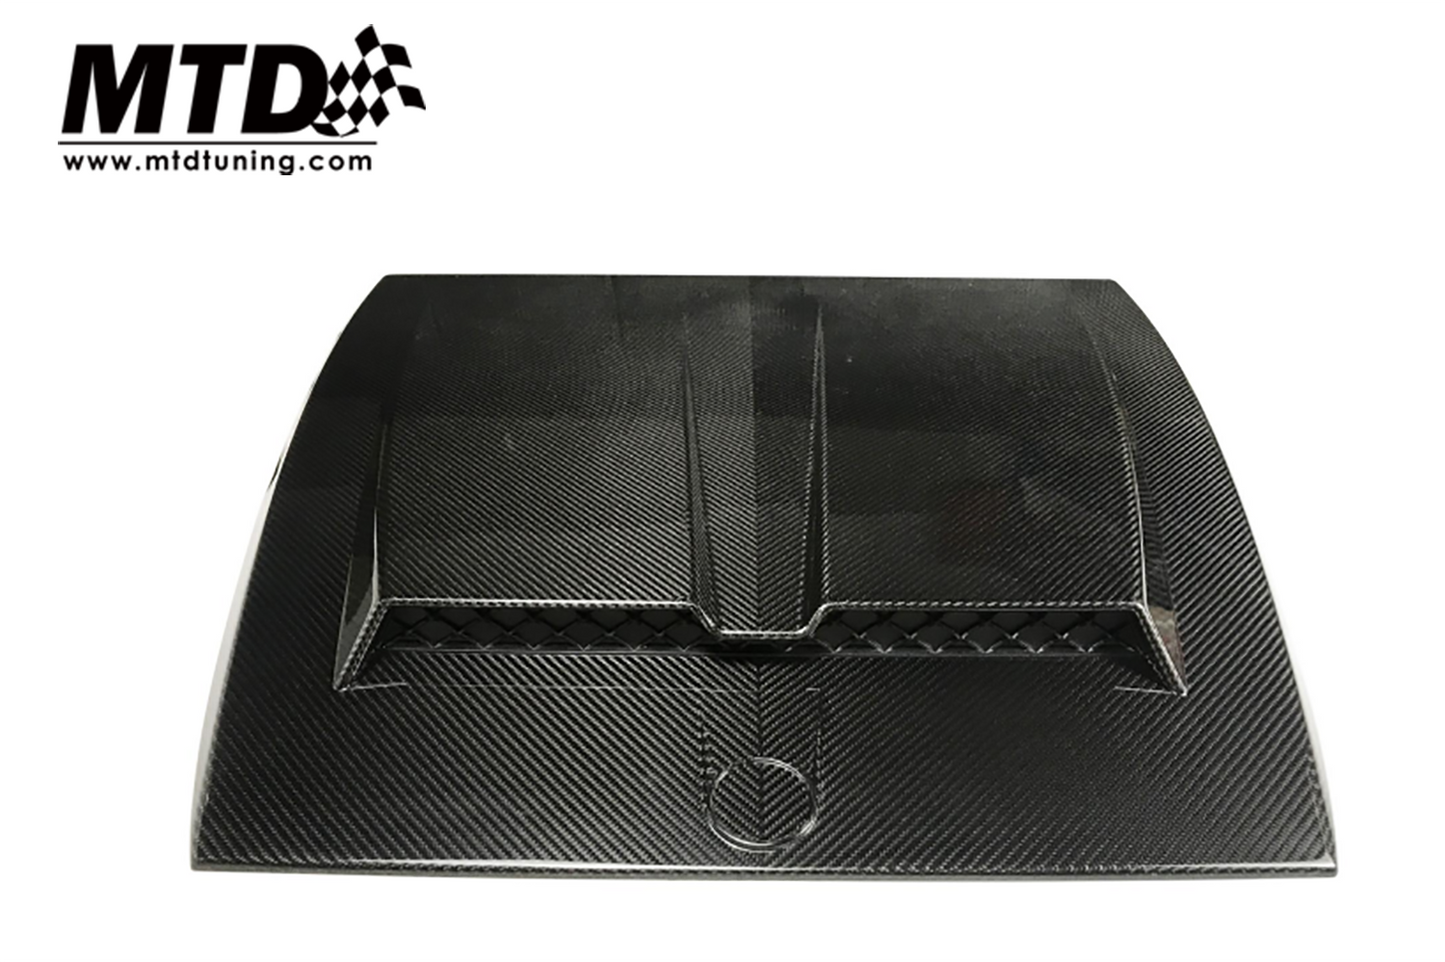 Mercedes Benz G Class W464 front engine hood vent cover